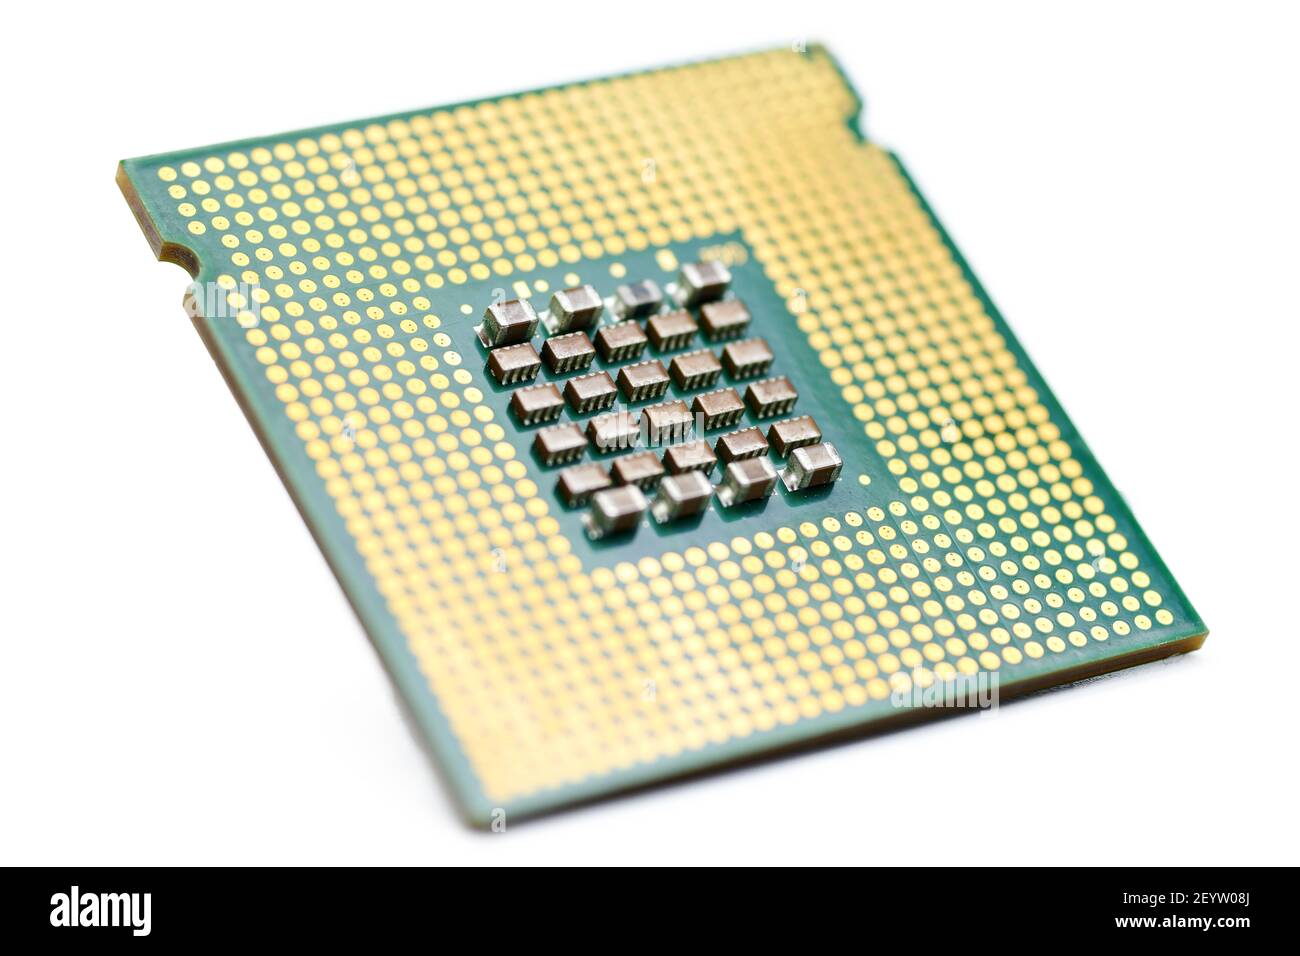 CPU, central processor unit, isolated background. Main electronic circuitry for computer. Shallow DOF Stock Photo